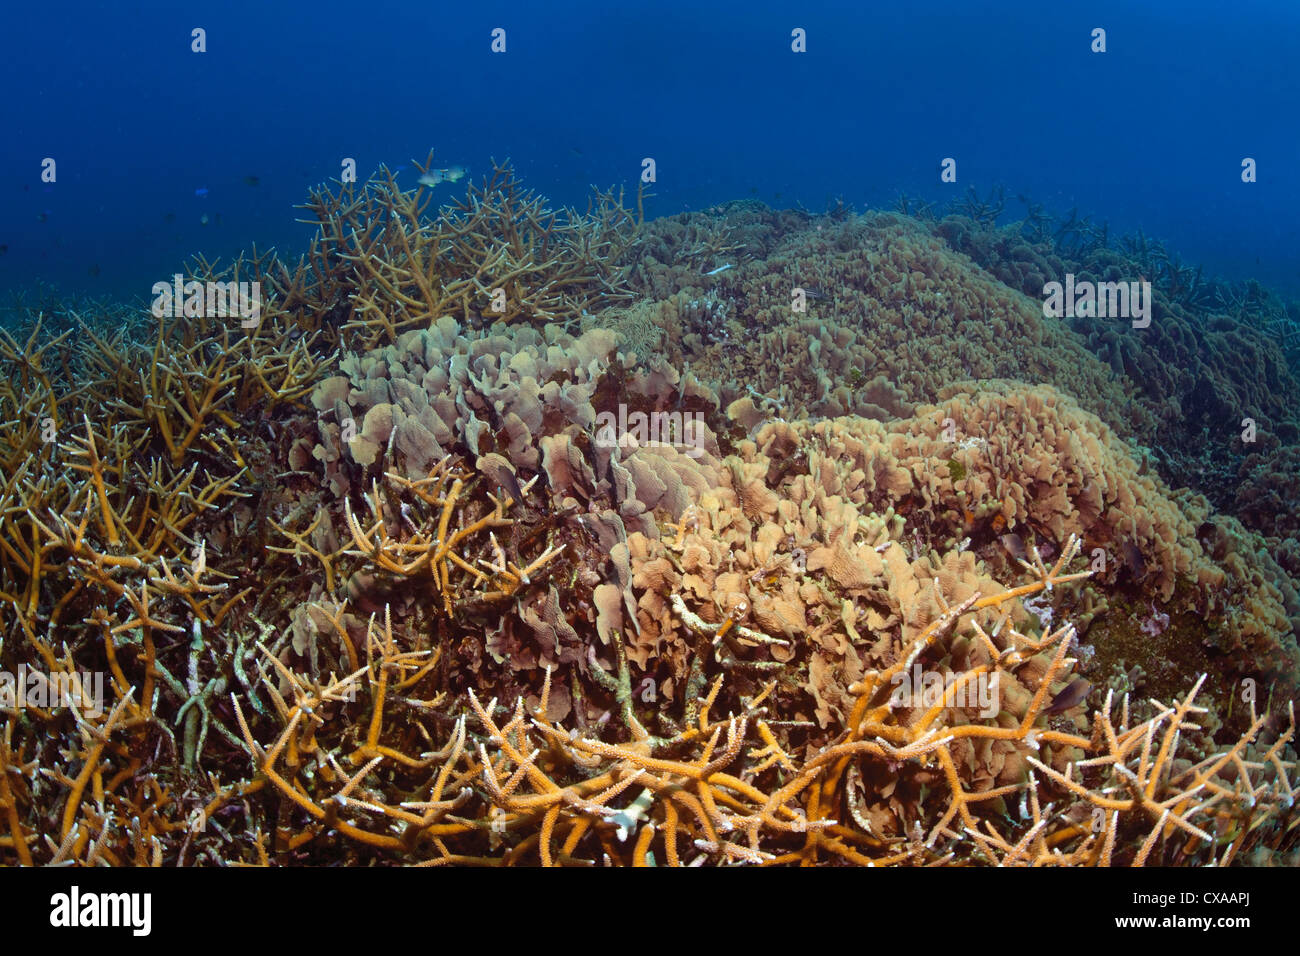 A coral reef at Cordelia Banks at the Swan Islands off the coast of Honduras. Stock Photo